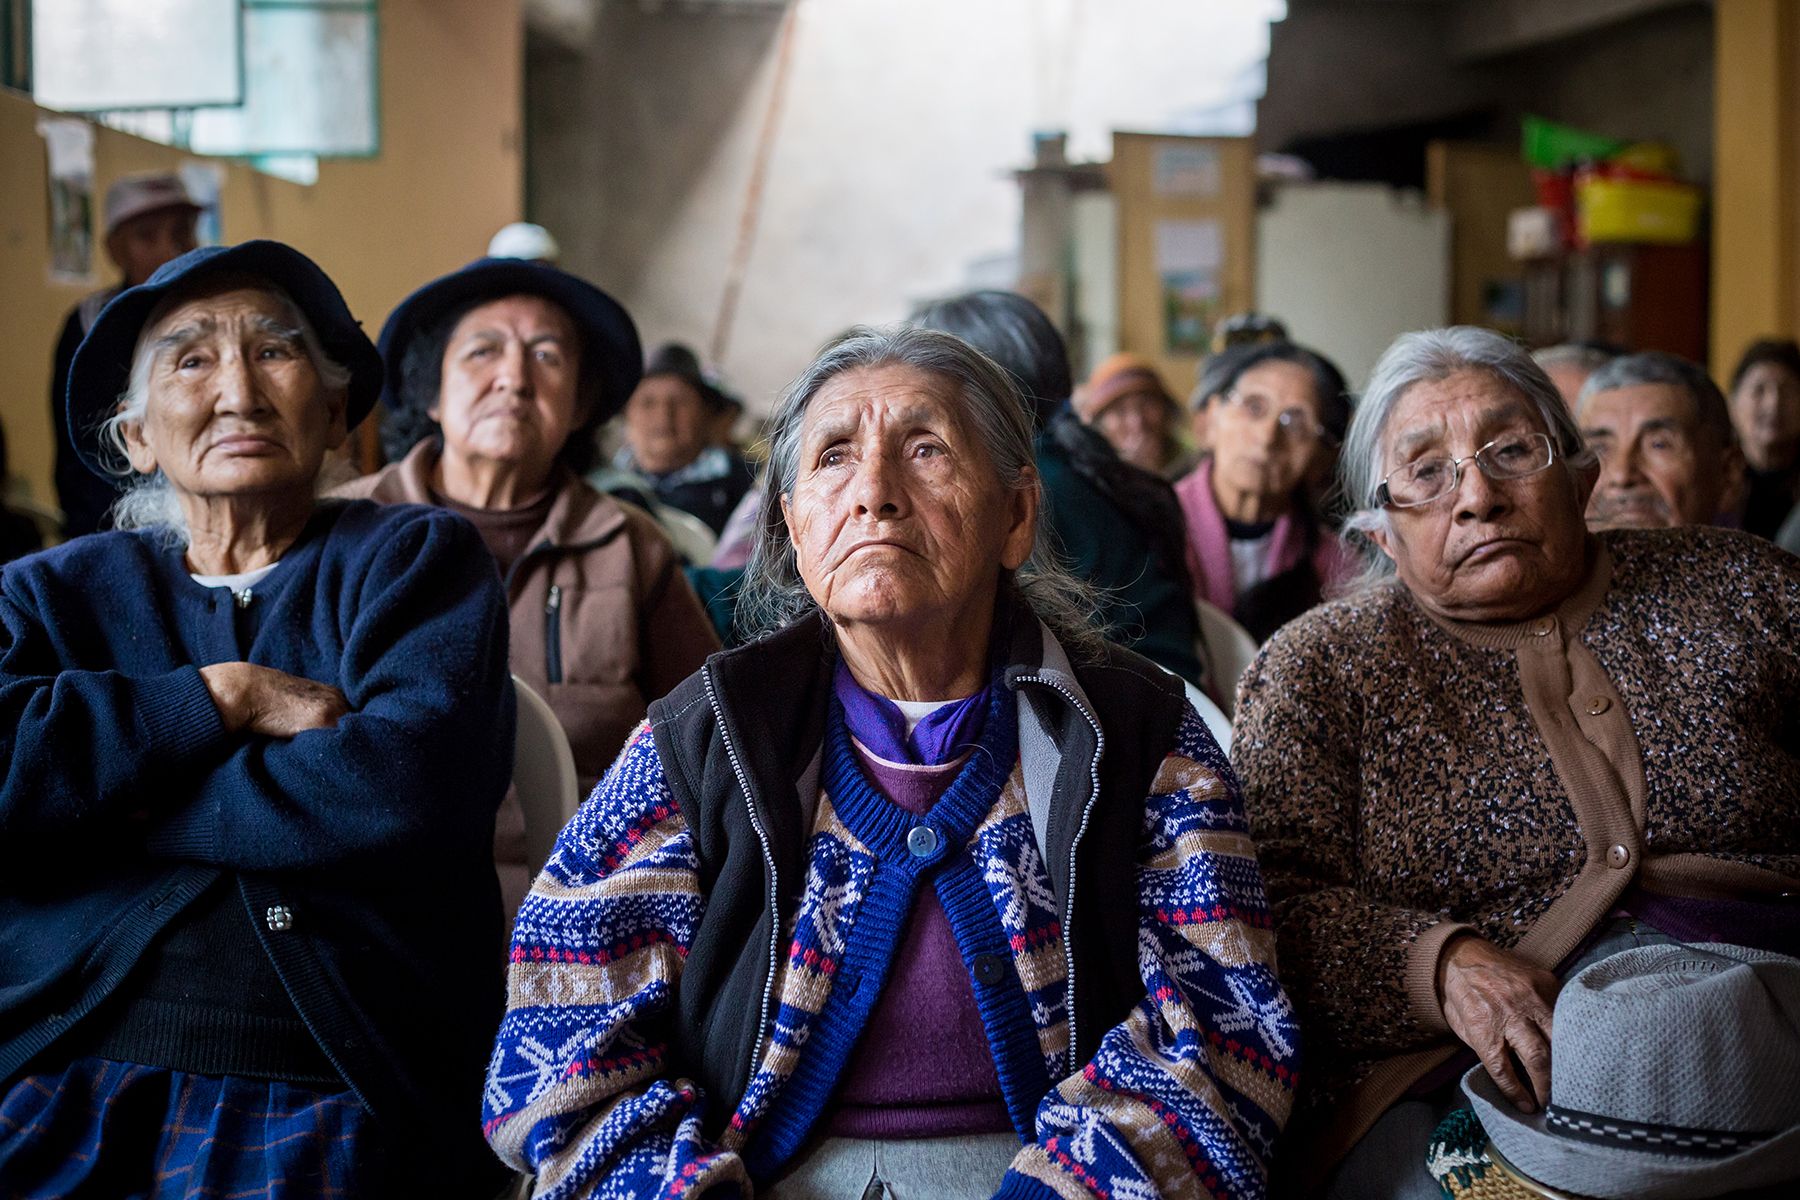 Peru is among many countries undergoing rapid aging, with the proportion of the population over the age of 60 projected to rise from 9.2 percent in 2014 to 22.7 percent in 2050. Advances in medicine, improvements in sanitation and economic prosperity have led to longer life expectancies, while family planning has resulted in falling birth rates across the globe. In low and middle-income families, rapid aging can be a double-edged sword due to limited resource availability, deteriorating family support and i